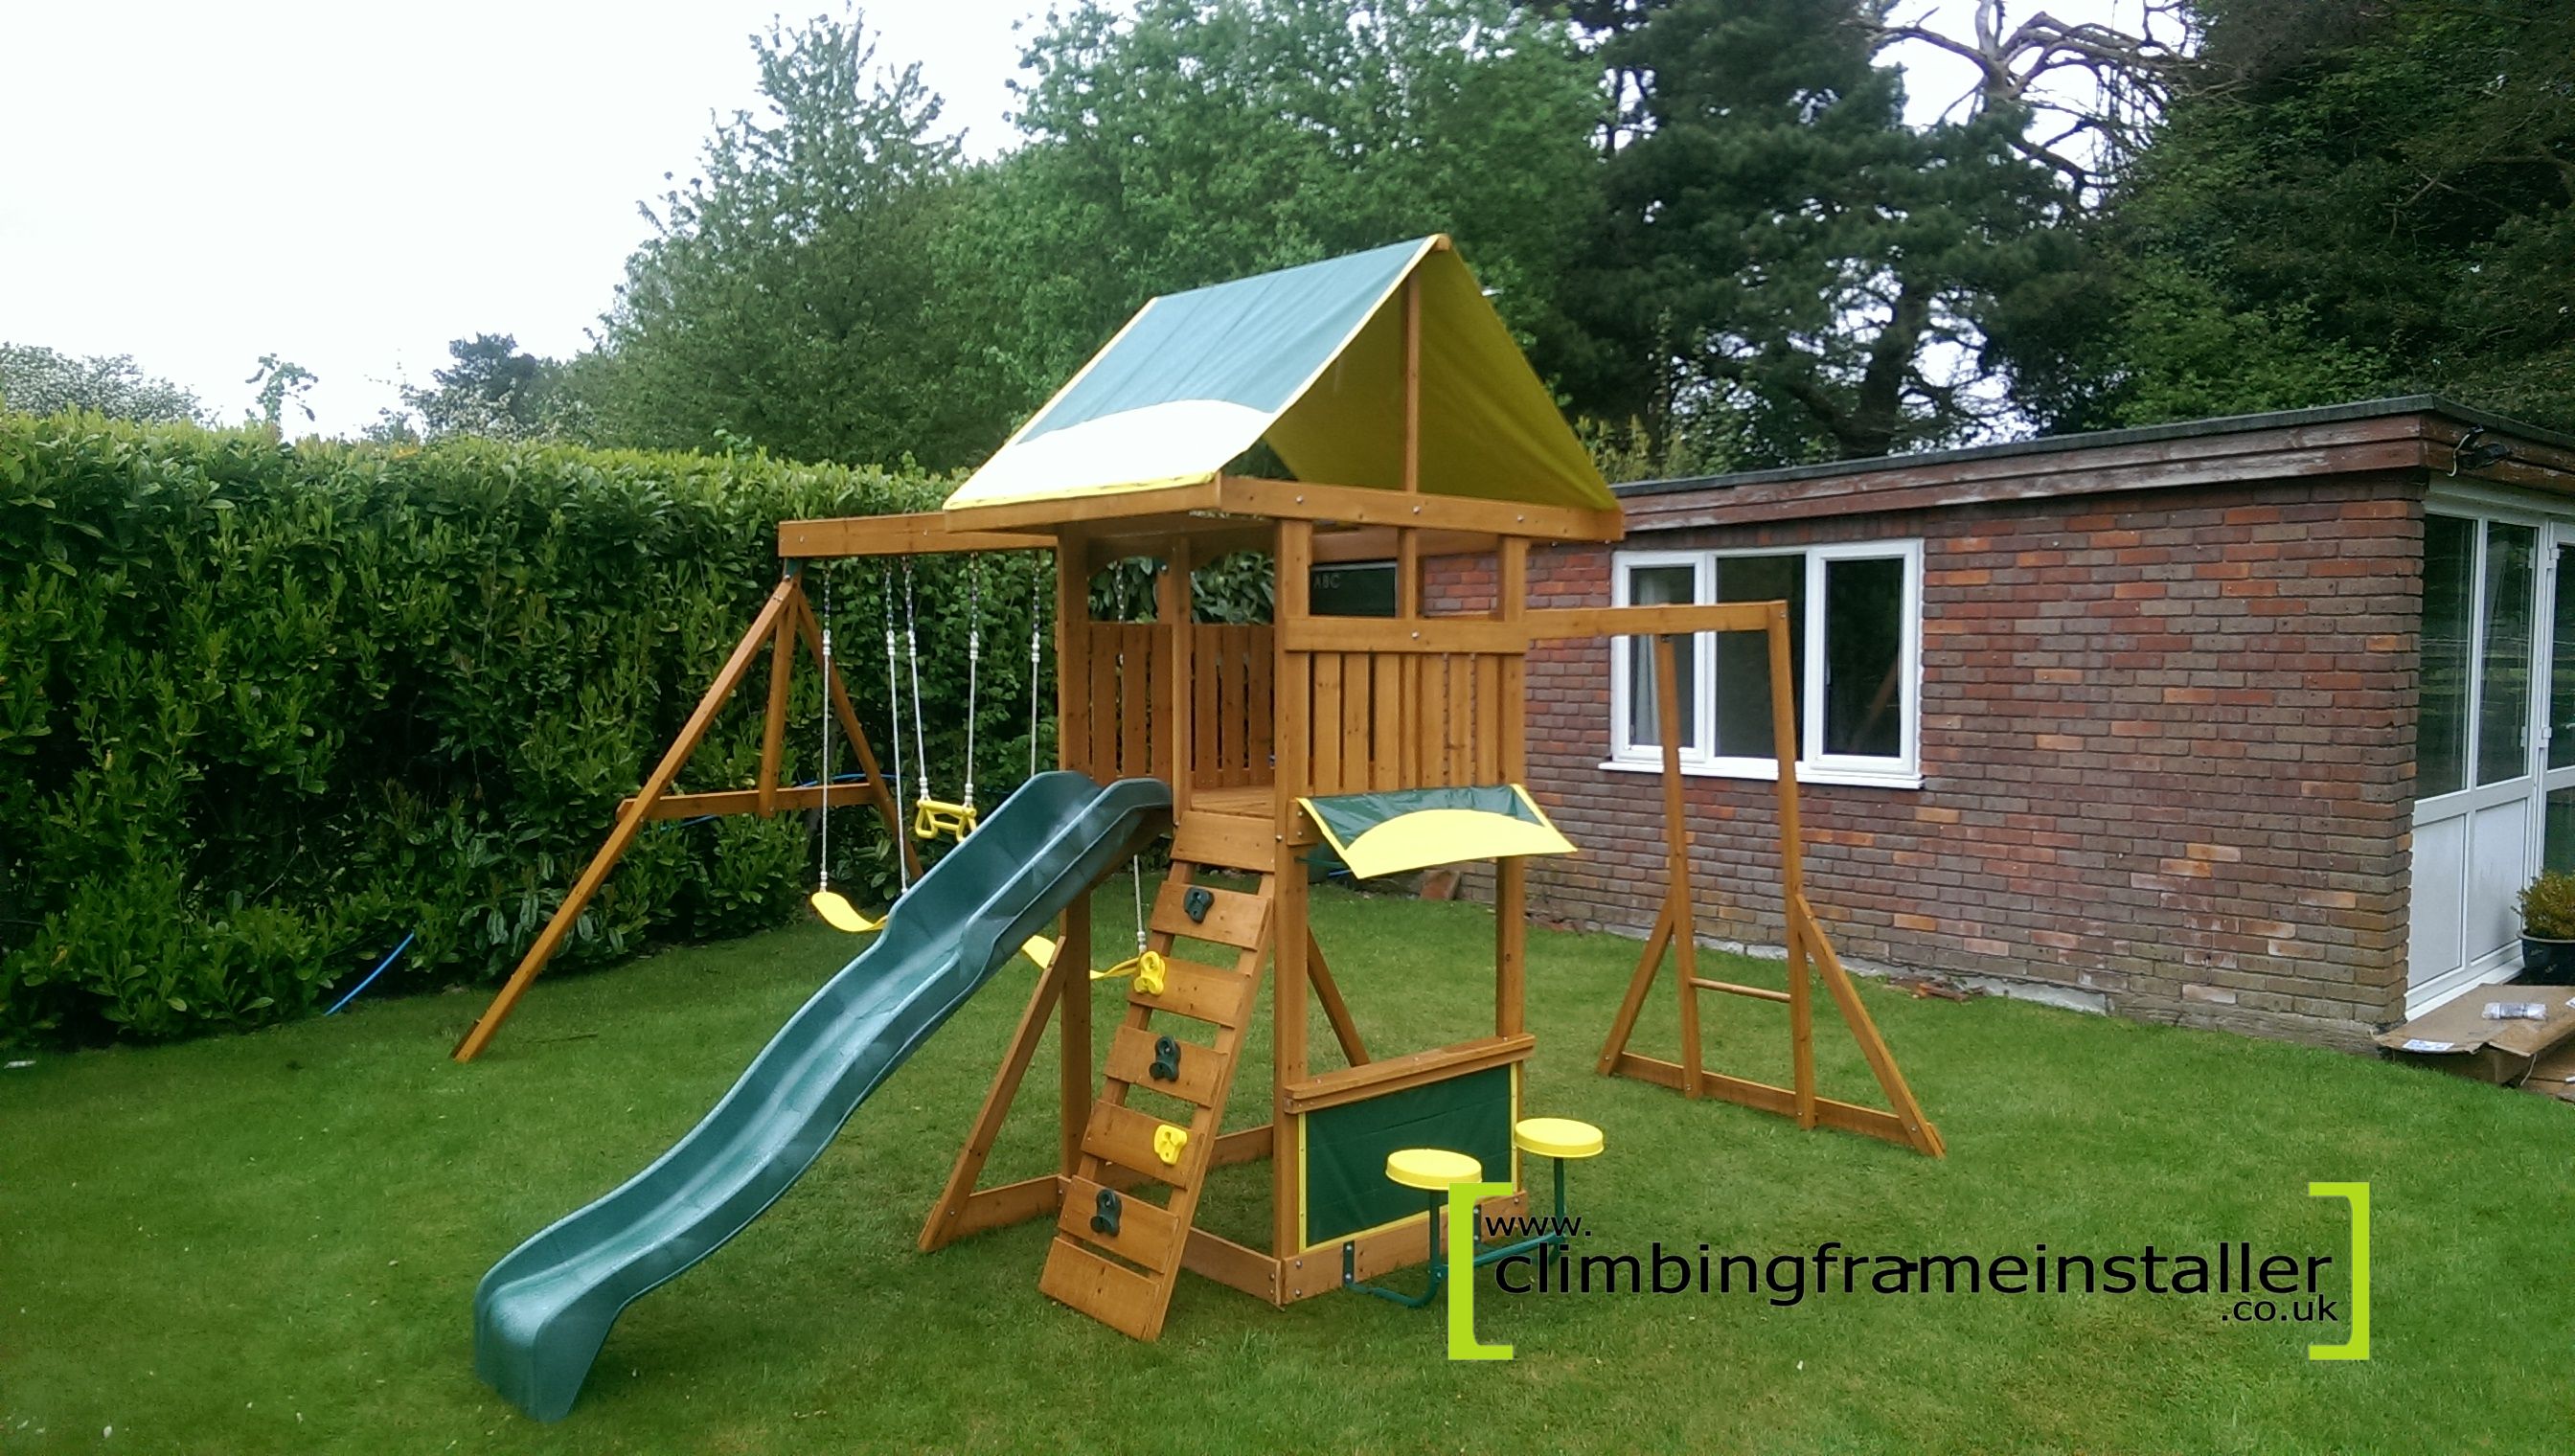 The Selwood Brightside Climbing Frame